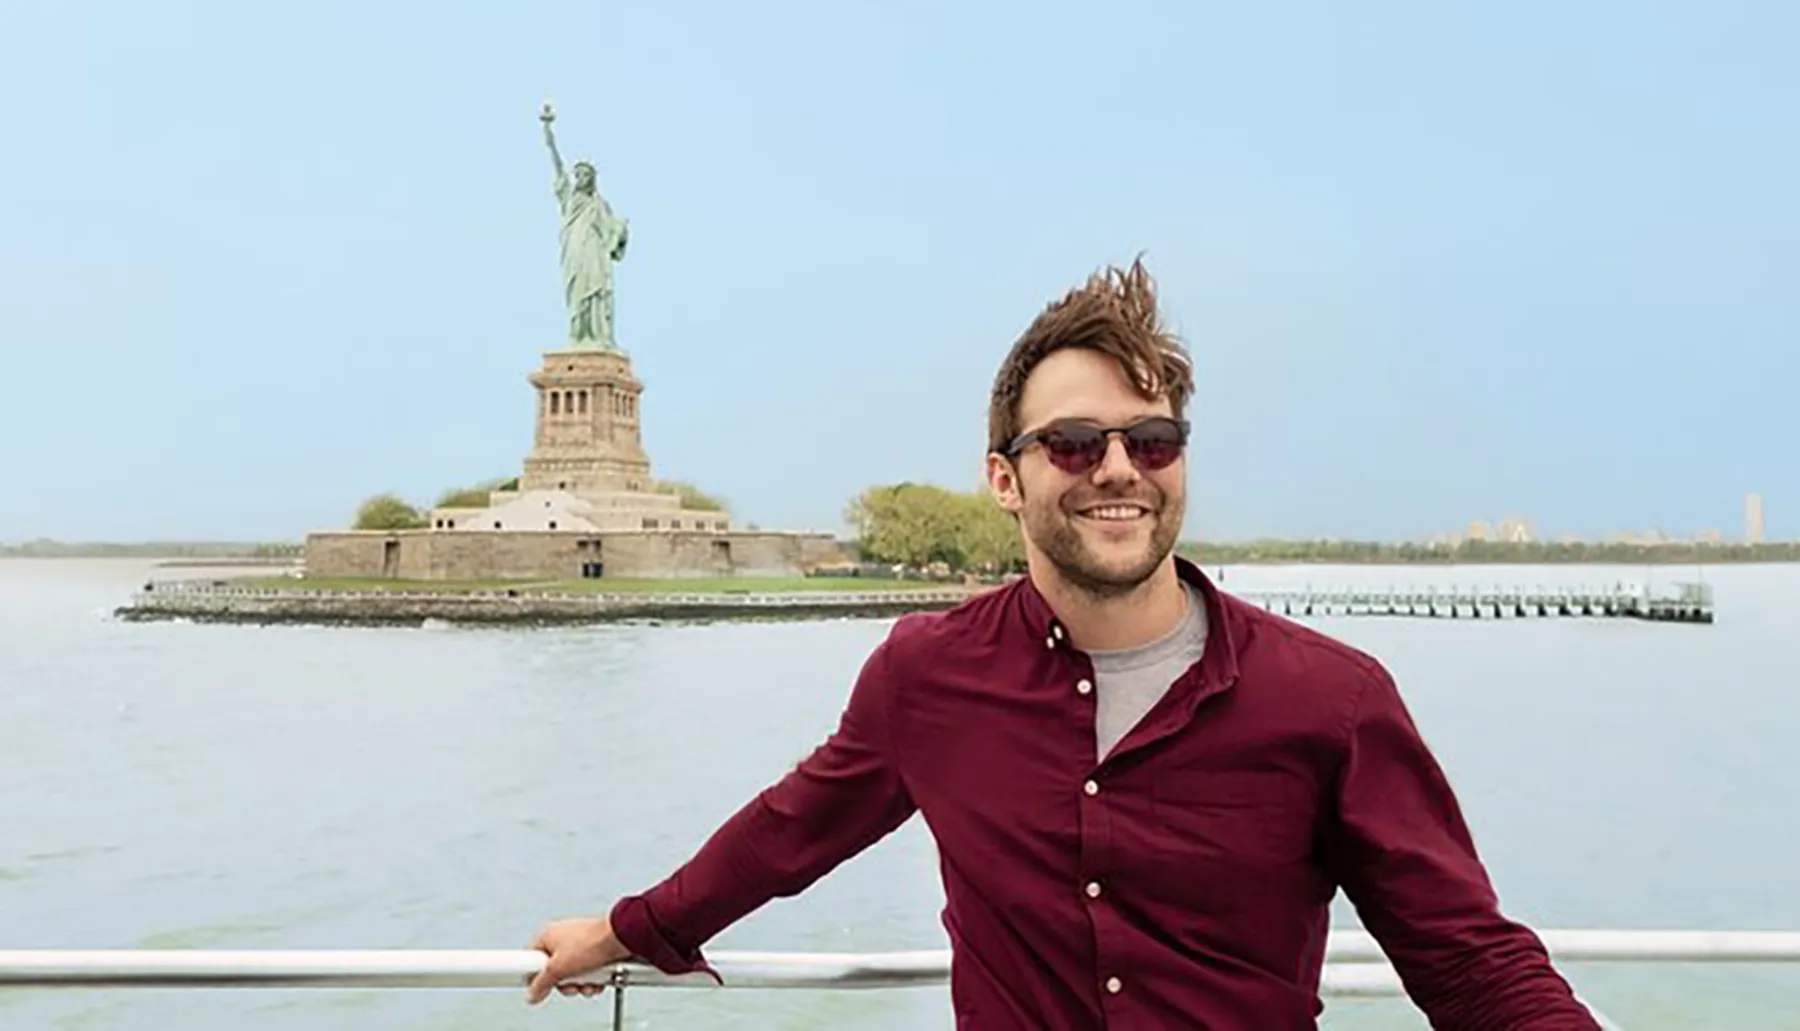 A smiling person is posing for a photo in front of the Statue of Liberty.